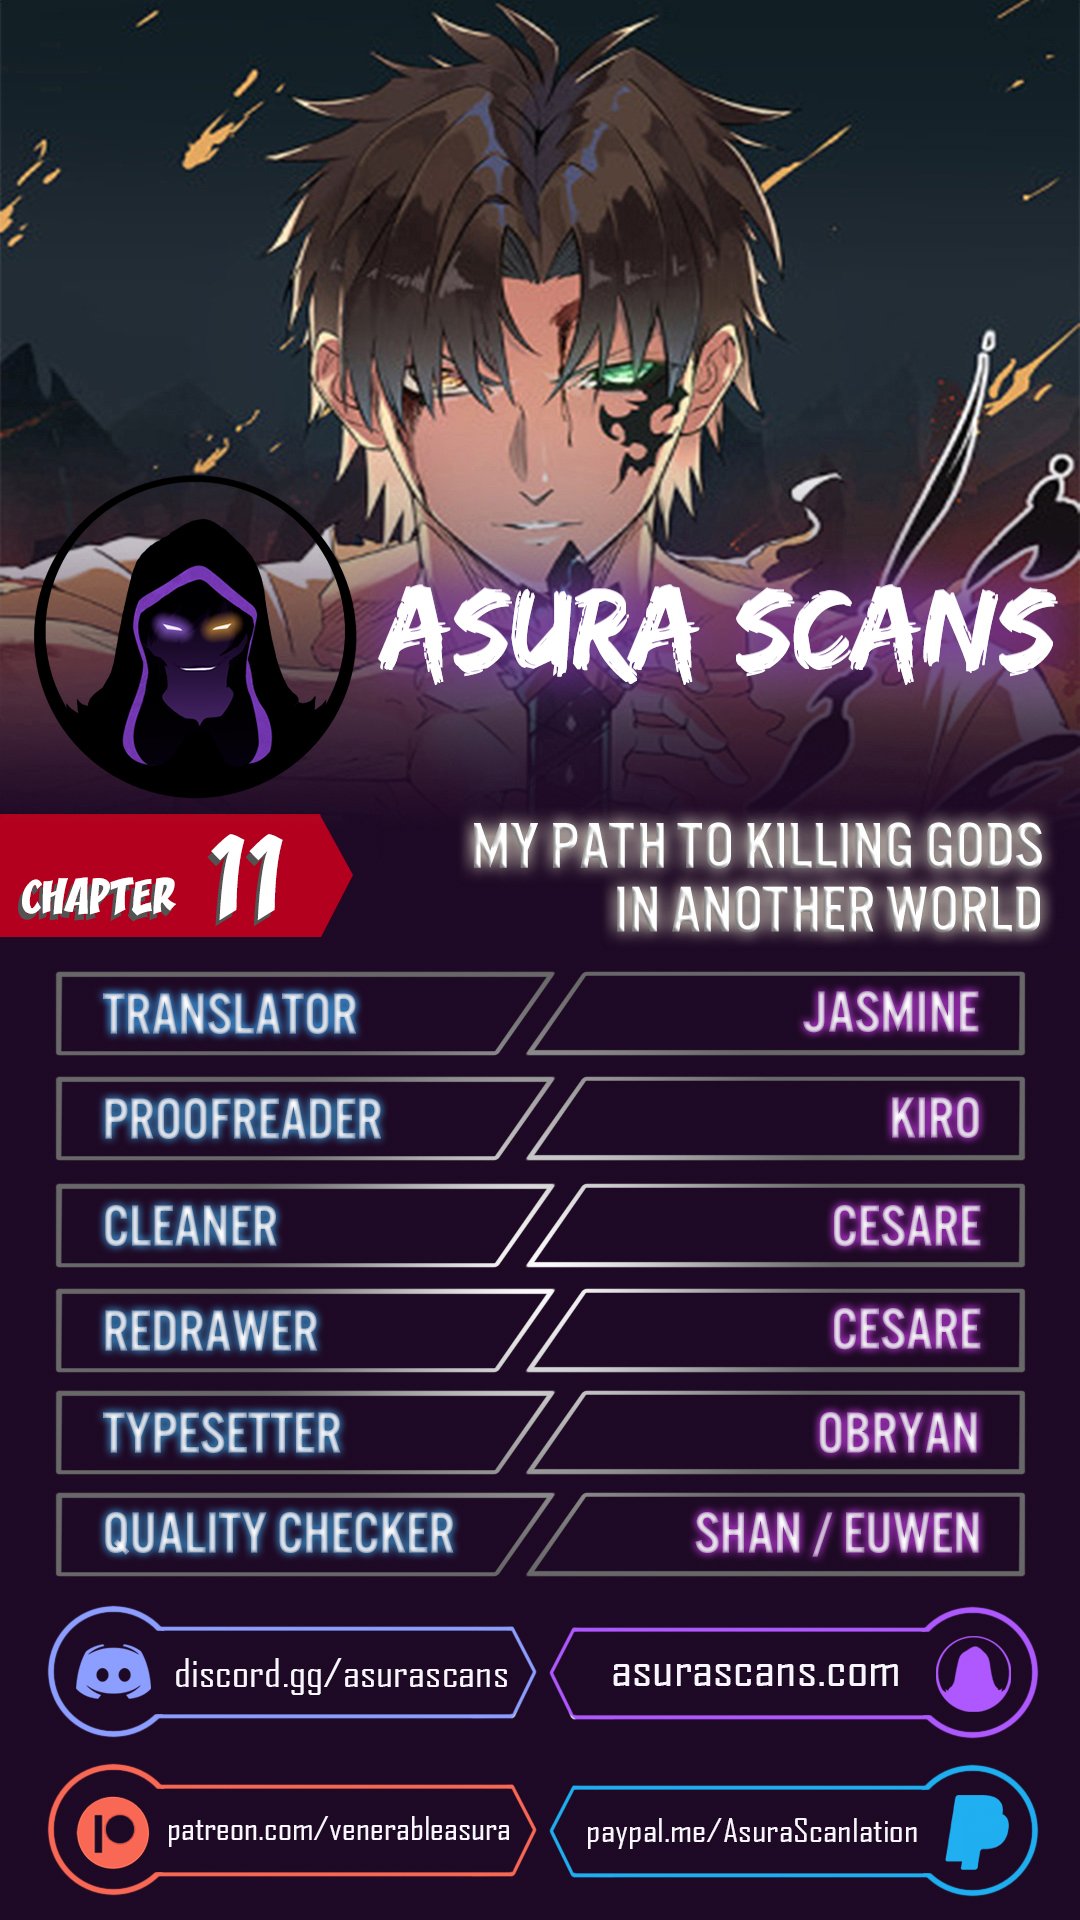 My Path to Killing Gods in Another World - Chapter 23162 - Image 1